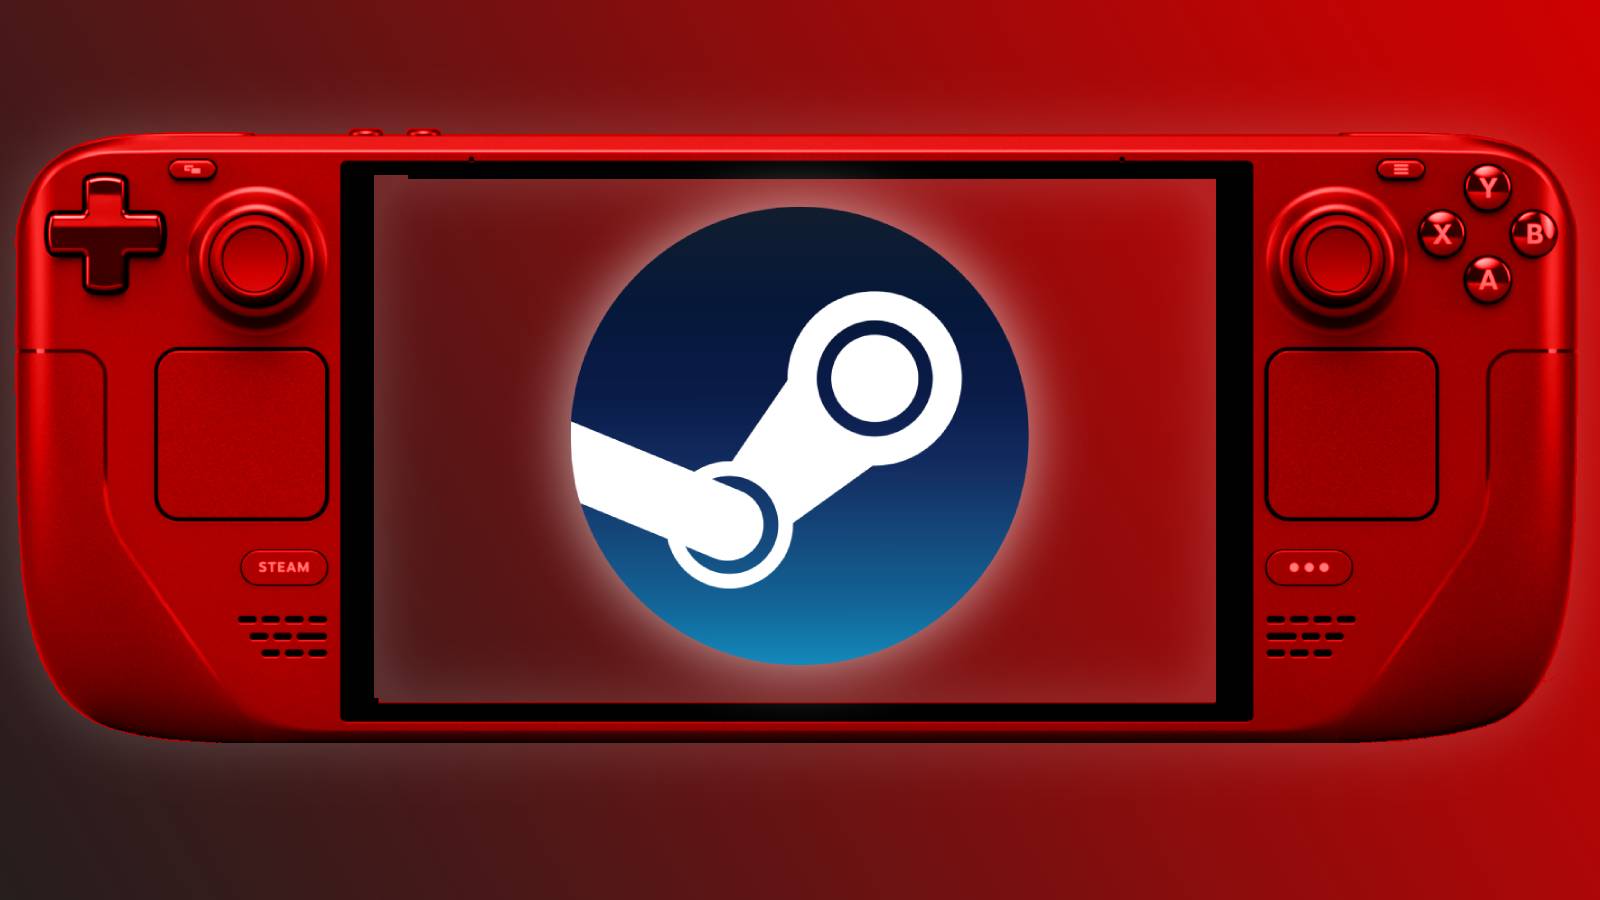 Image of the Steam logo on the screen of a red Steam Deck, with a black and red background.